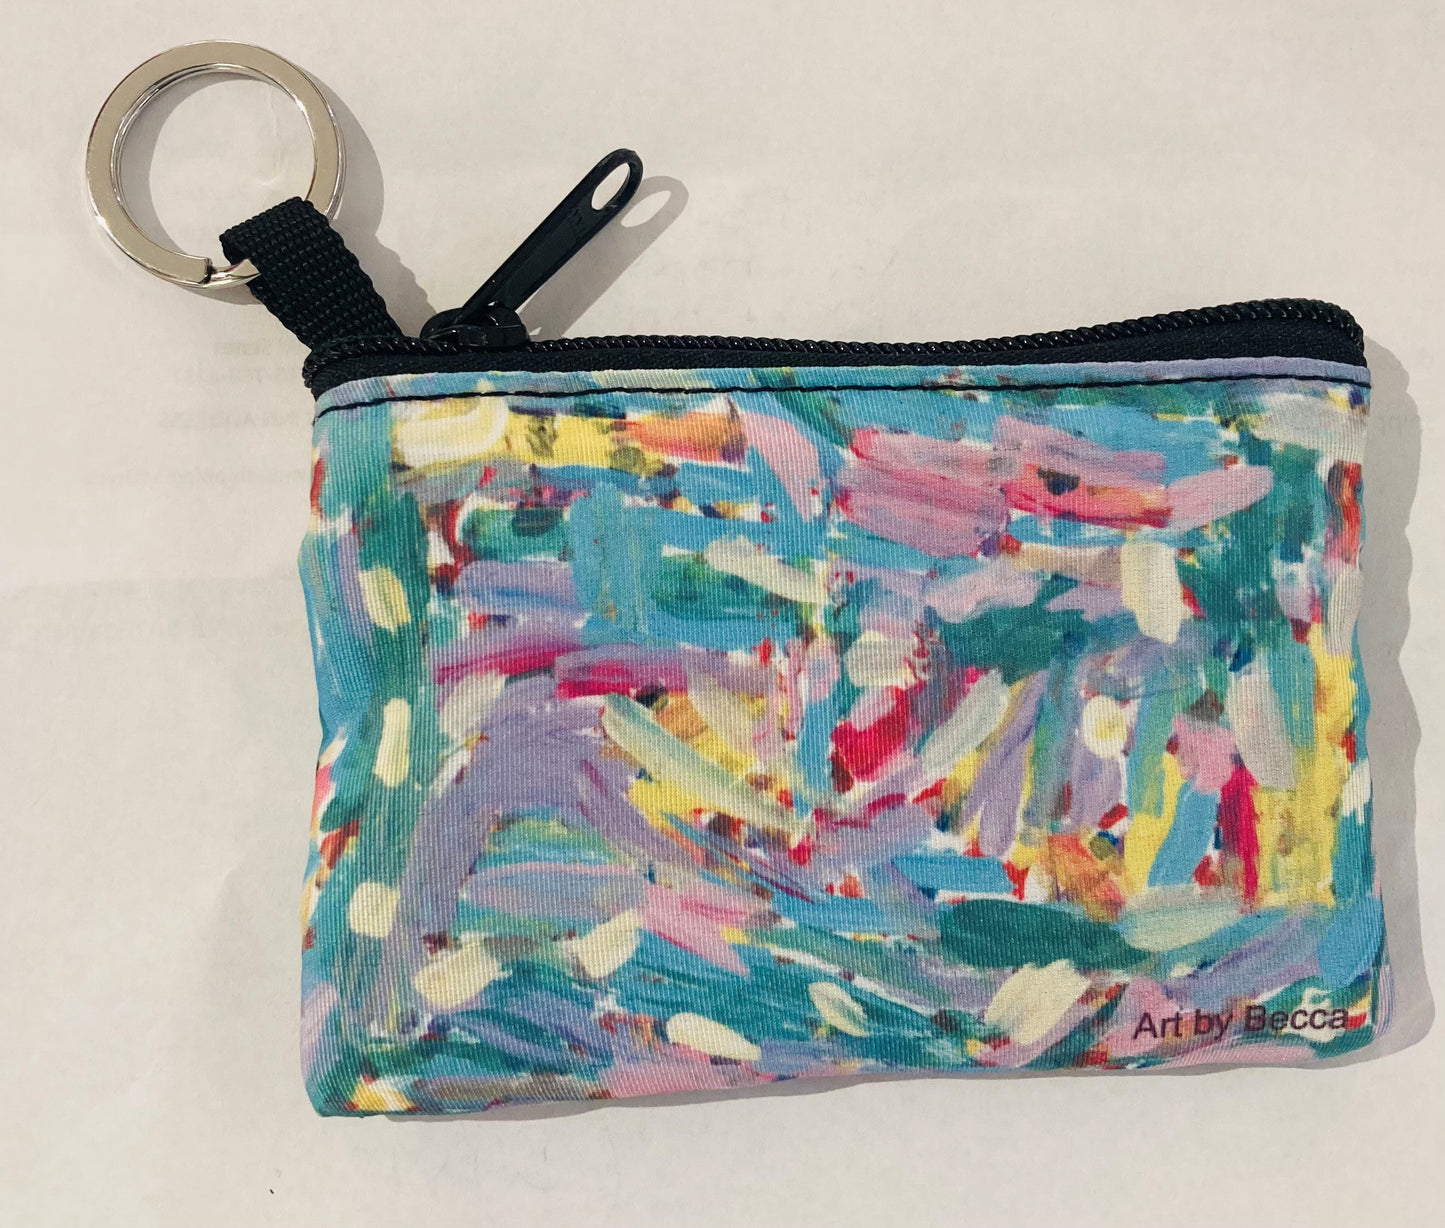 "Sunshine Blue Skies" Coin Purse by Becca